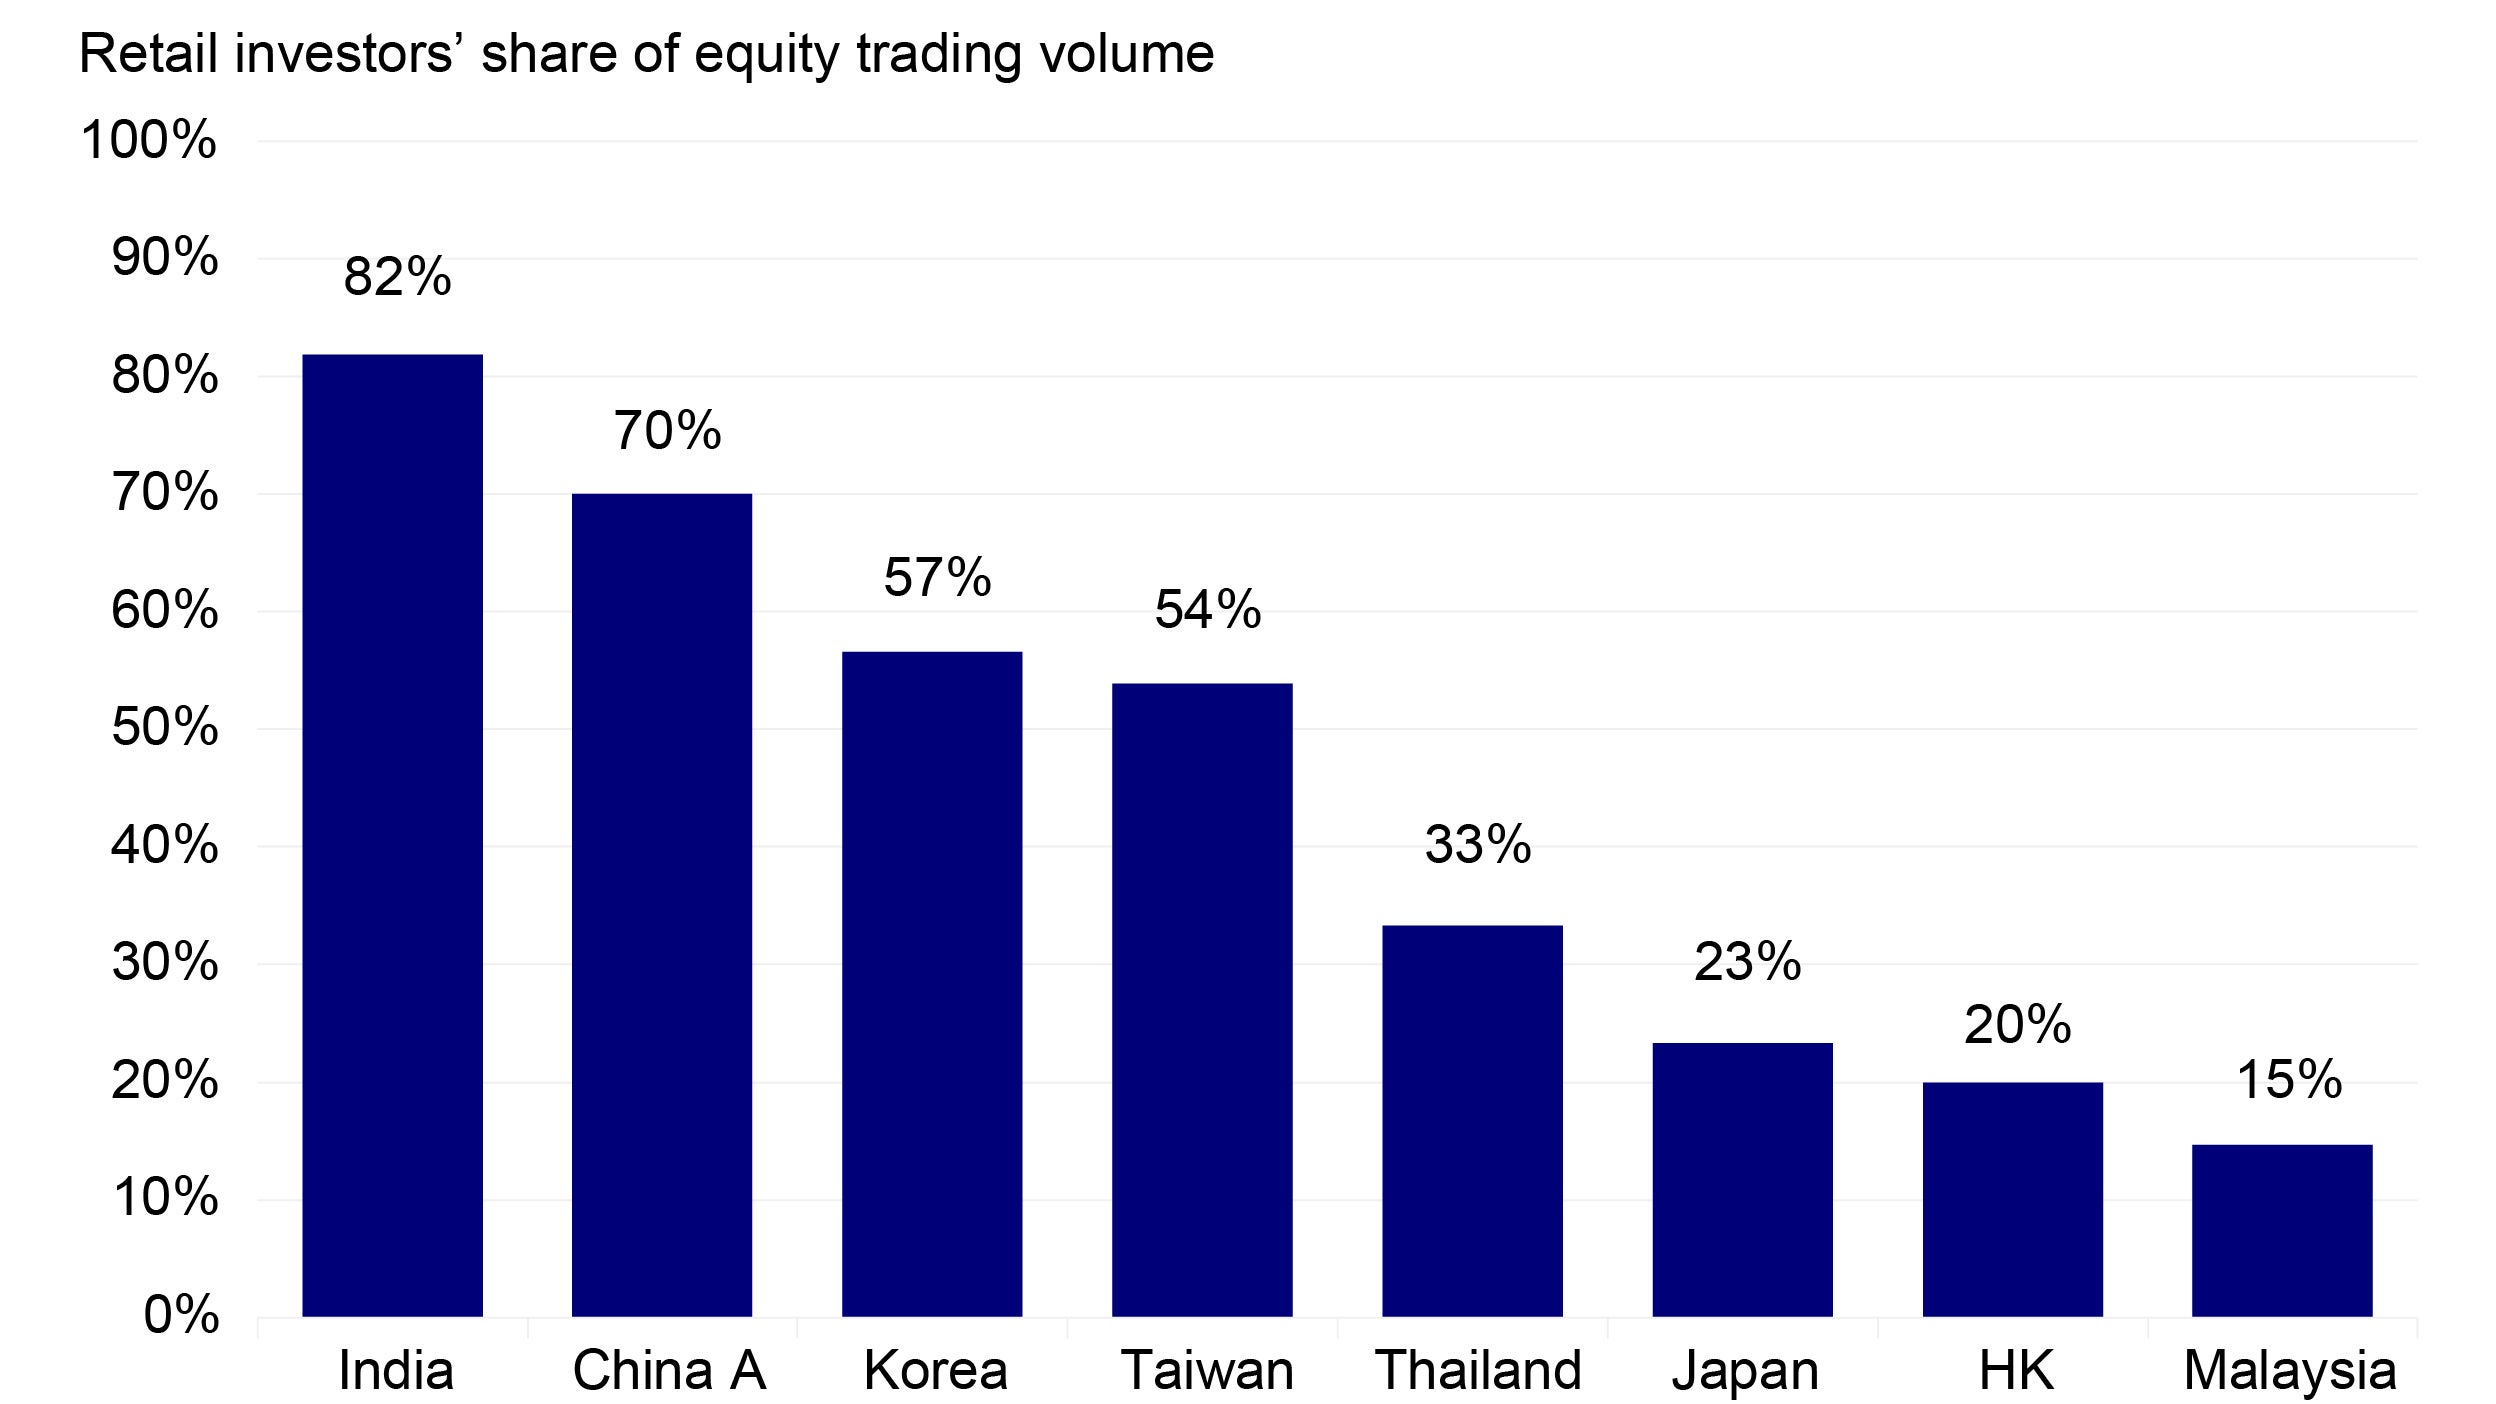 Figure 4: Strong of equity trading volume by retail investors